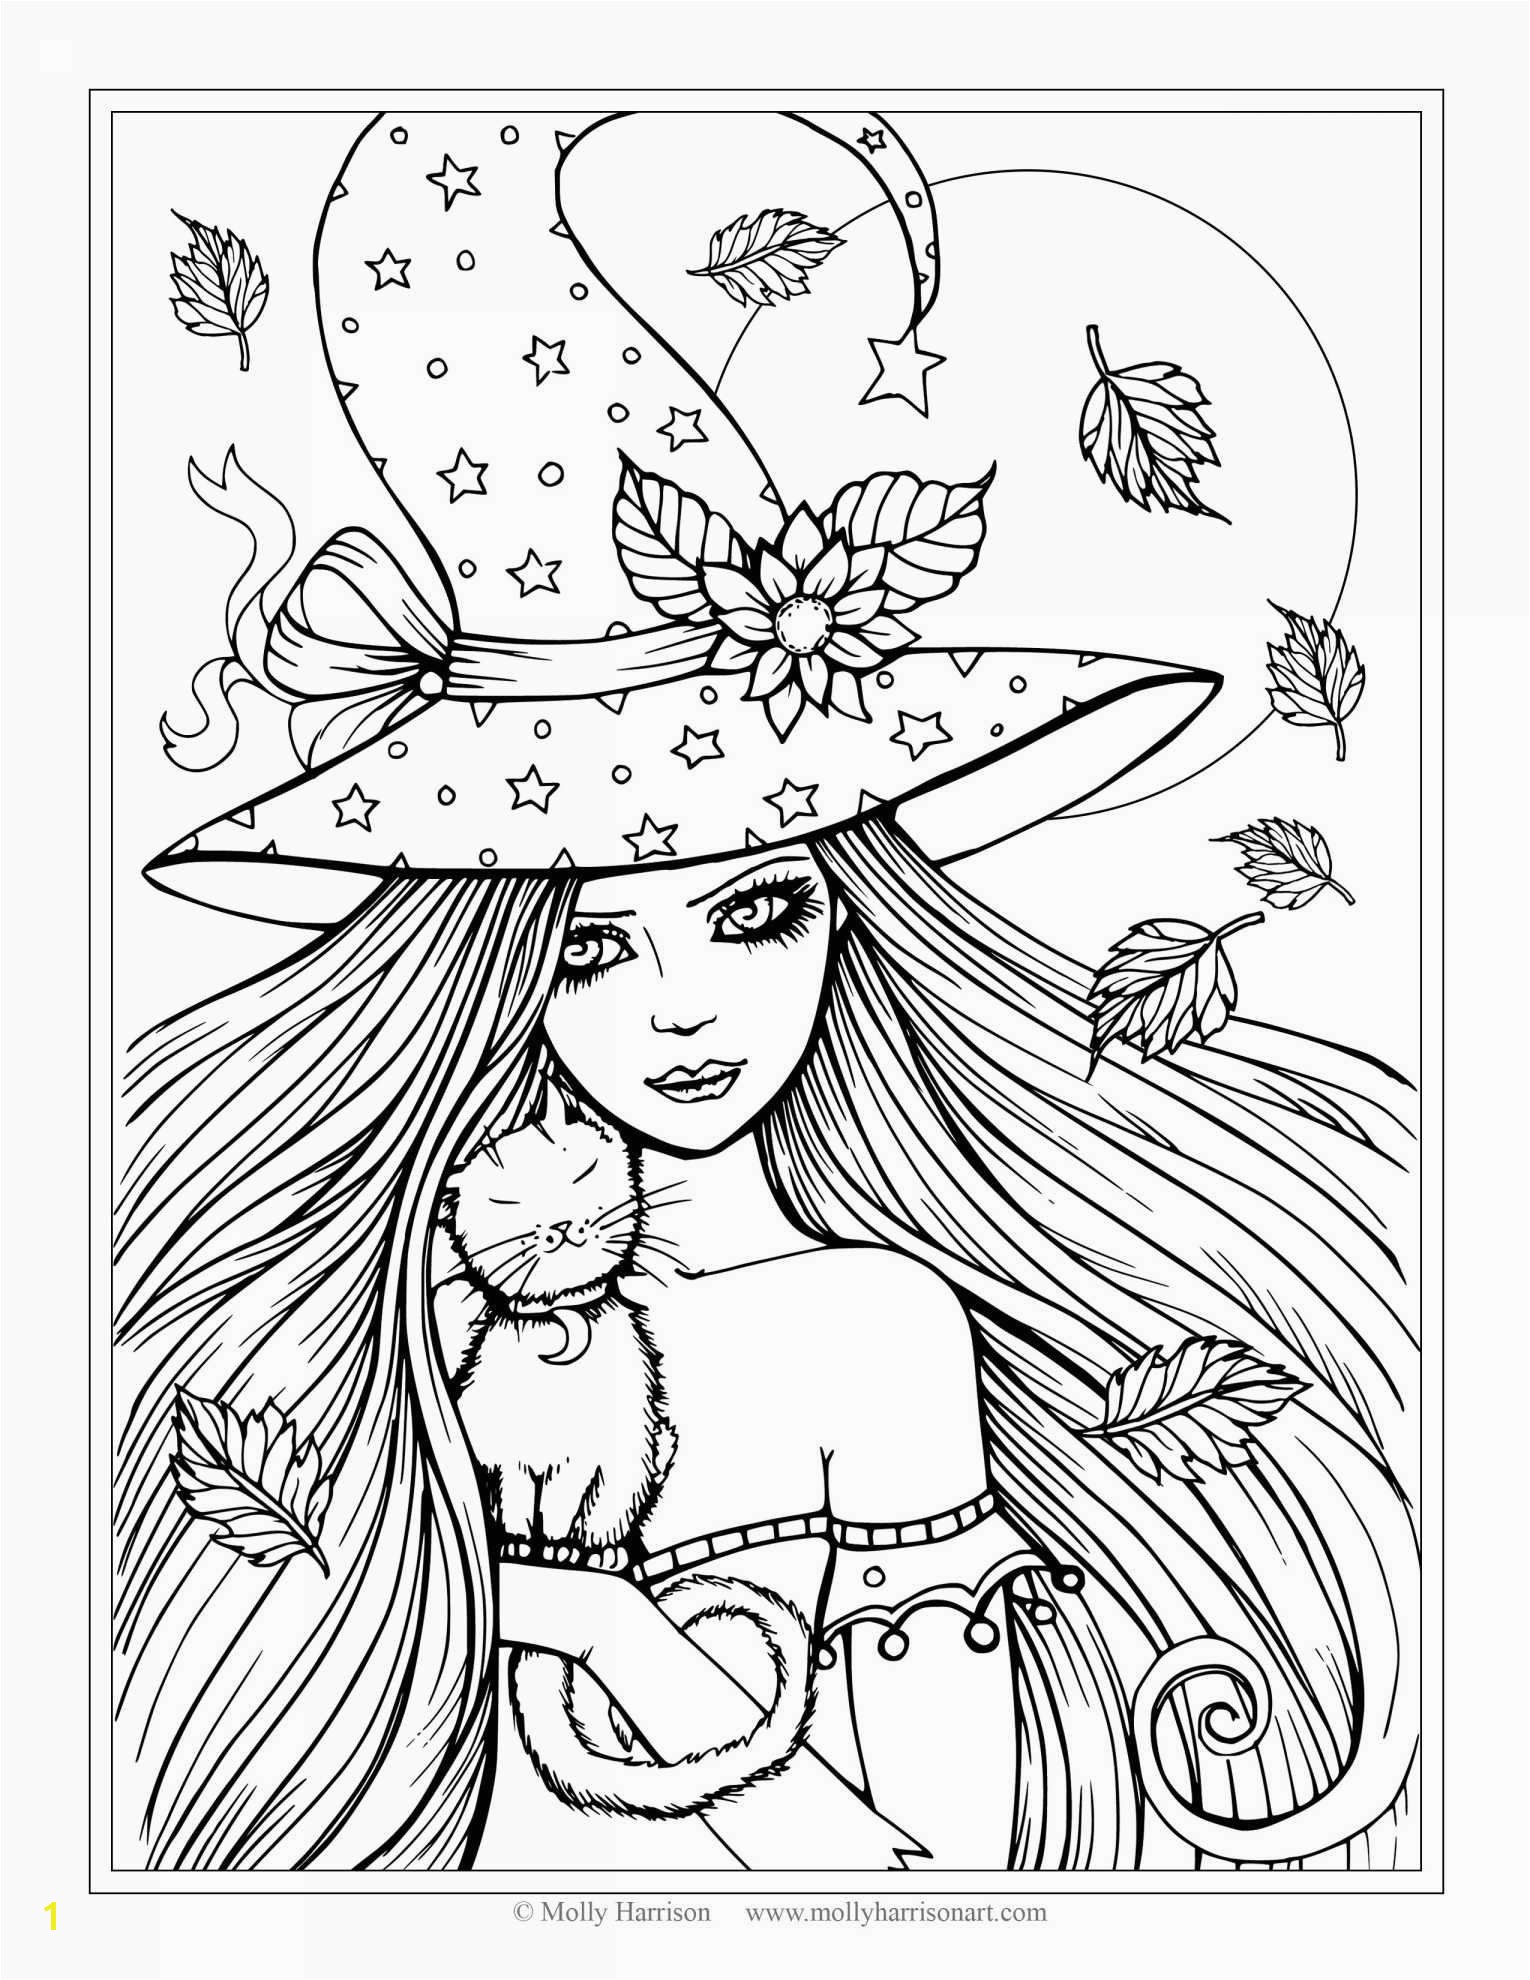 Disney Princess Coloring Pages Free Disney Princesses Coloring Pages Gallery thephotosync